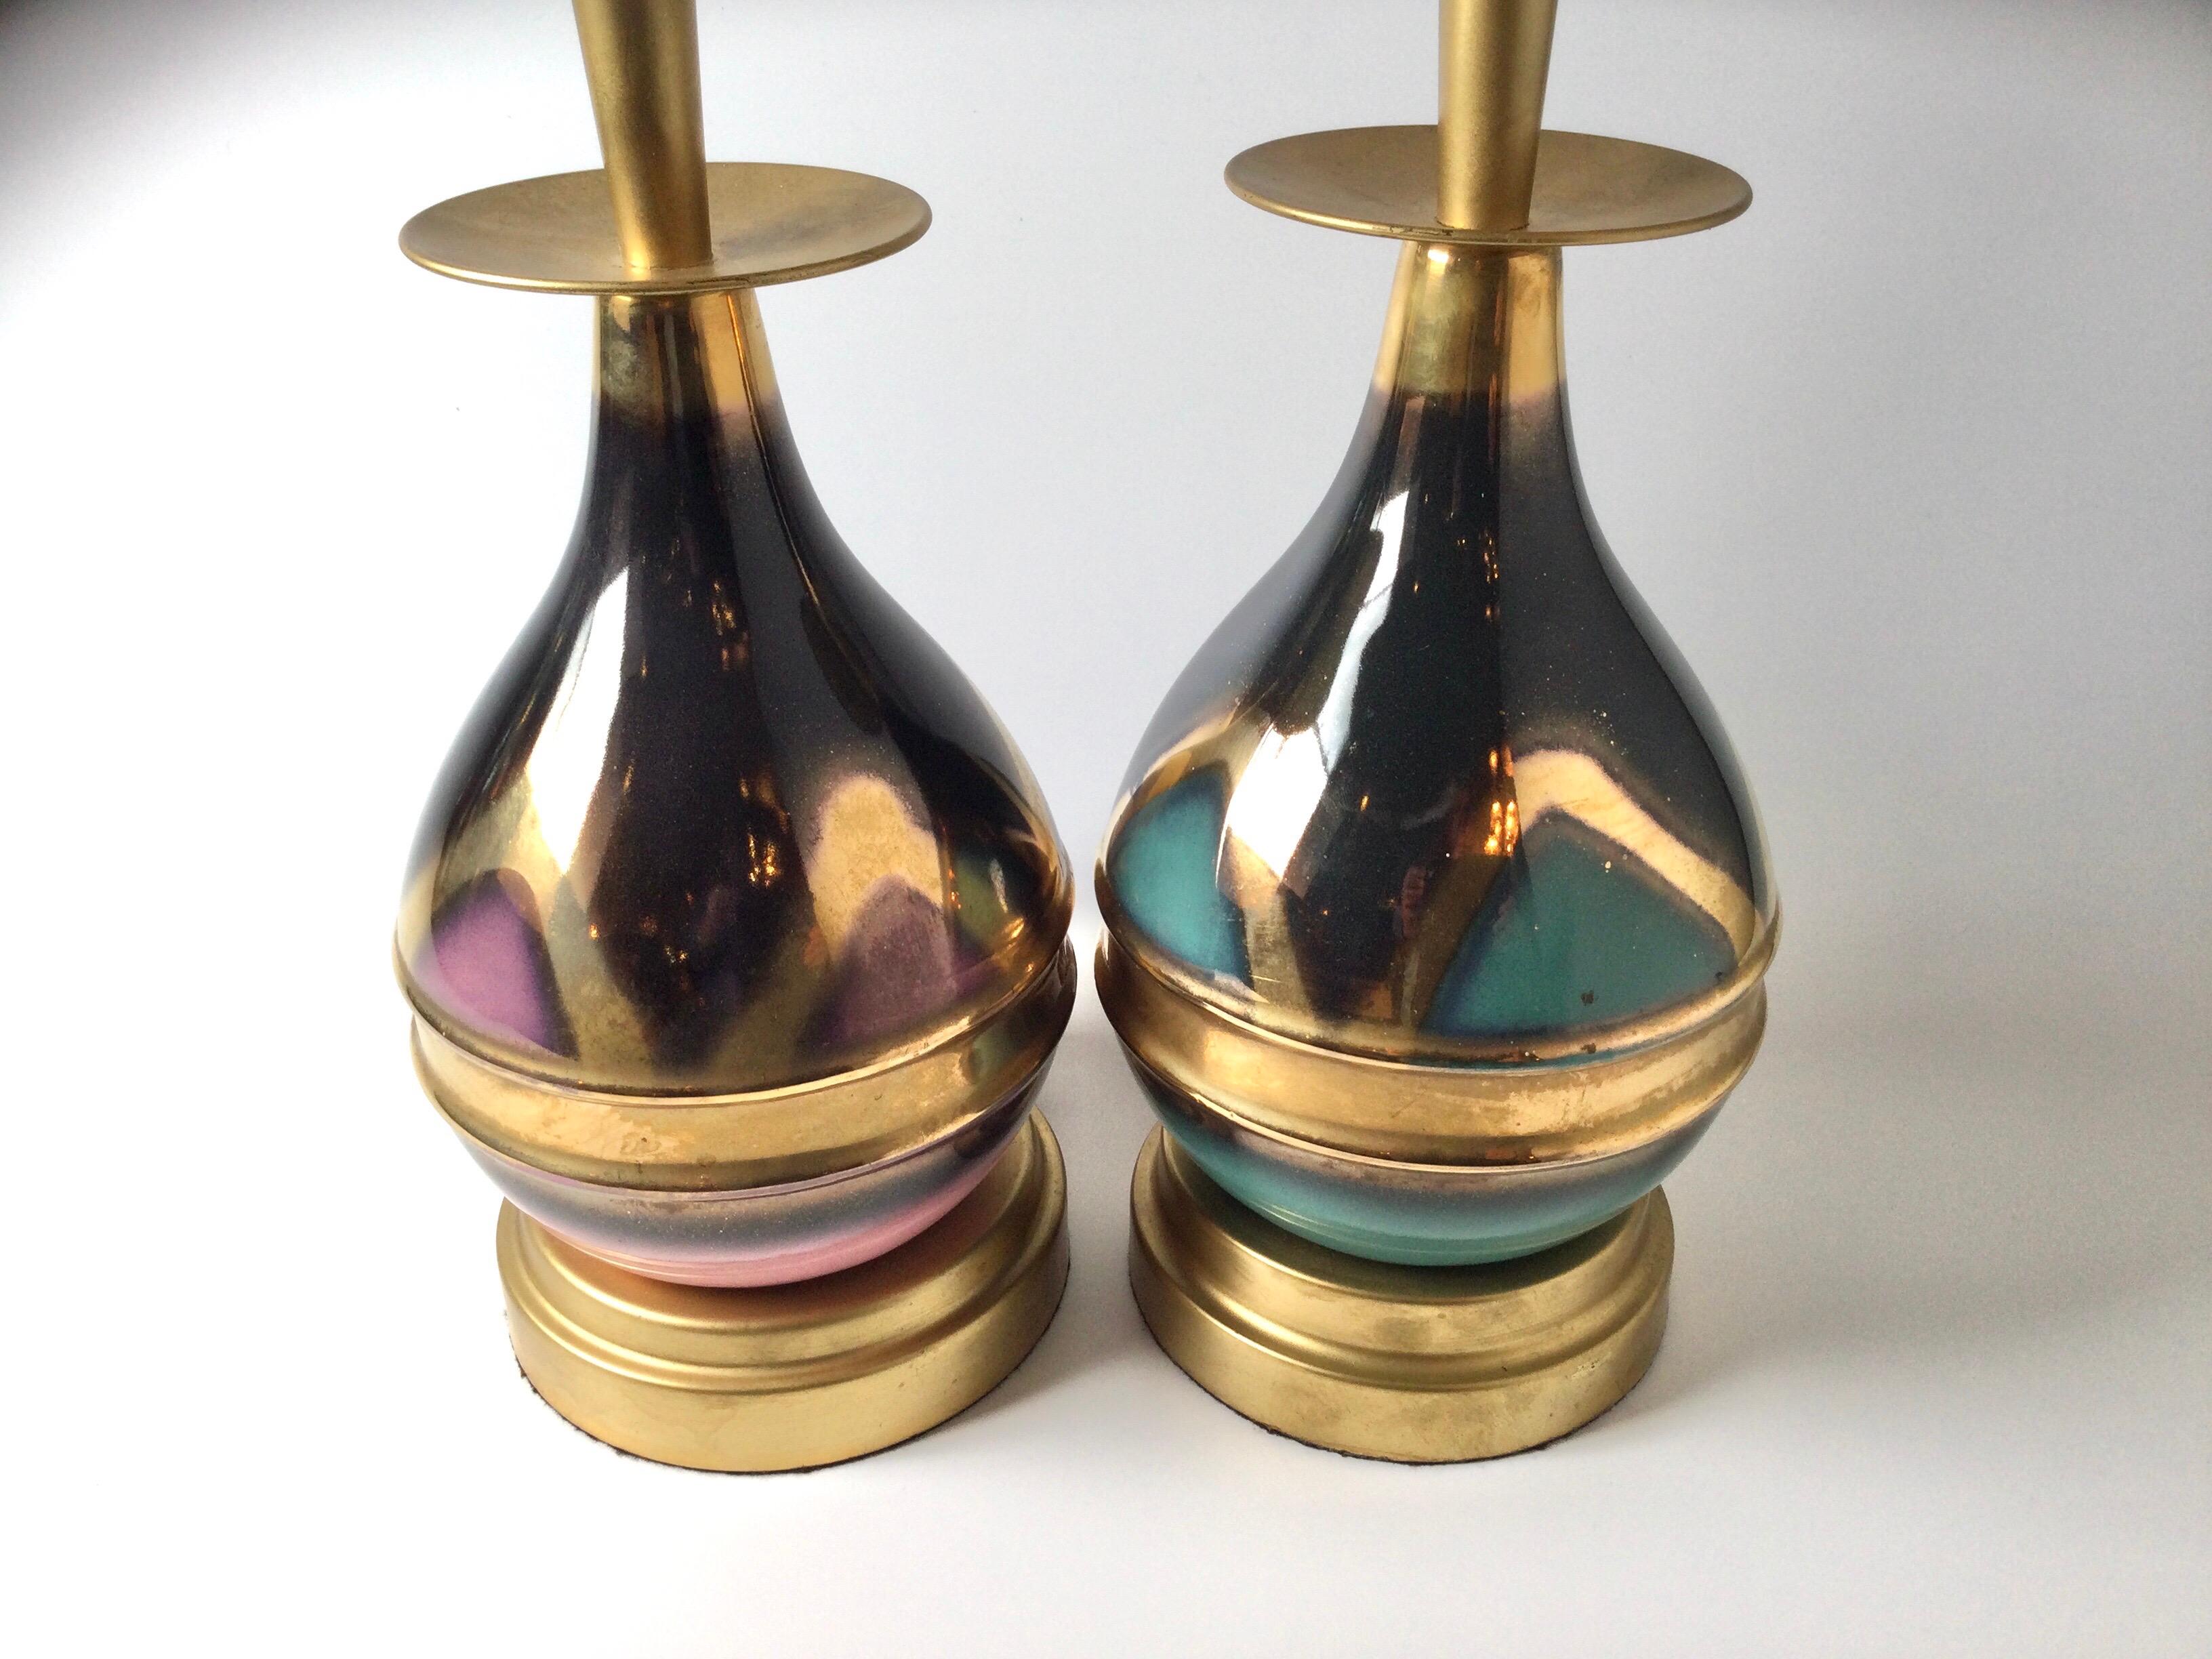 Great Mid-Century Modern lamps. Metal and metallic porcelain lamps. Brushed gold metal with one aqua metallic base and one rose pink metallic base. Measures: 32